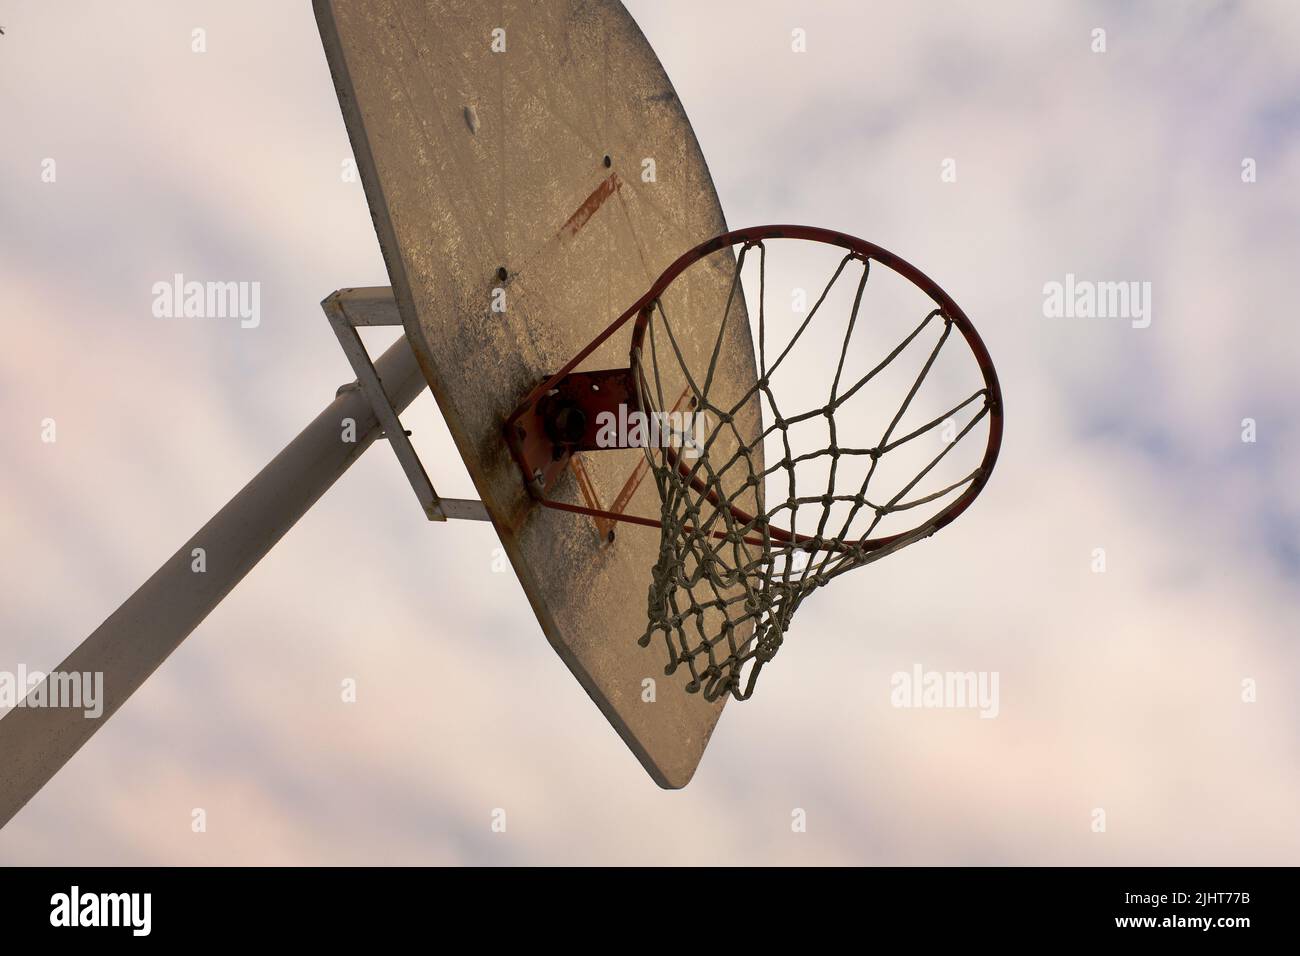 Low Angle View of Basketball Hoop and Backboard Stock Photo